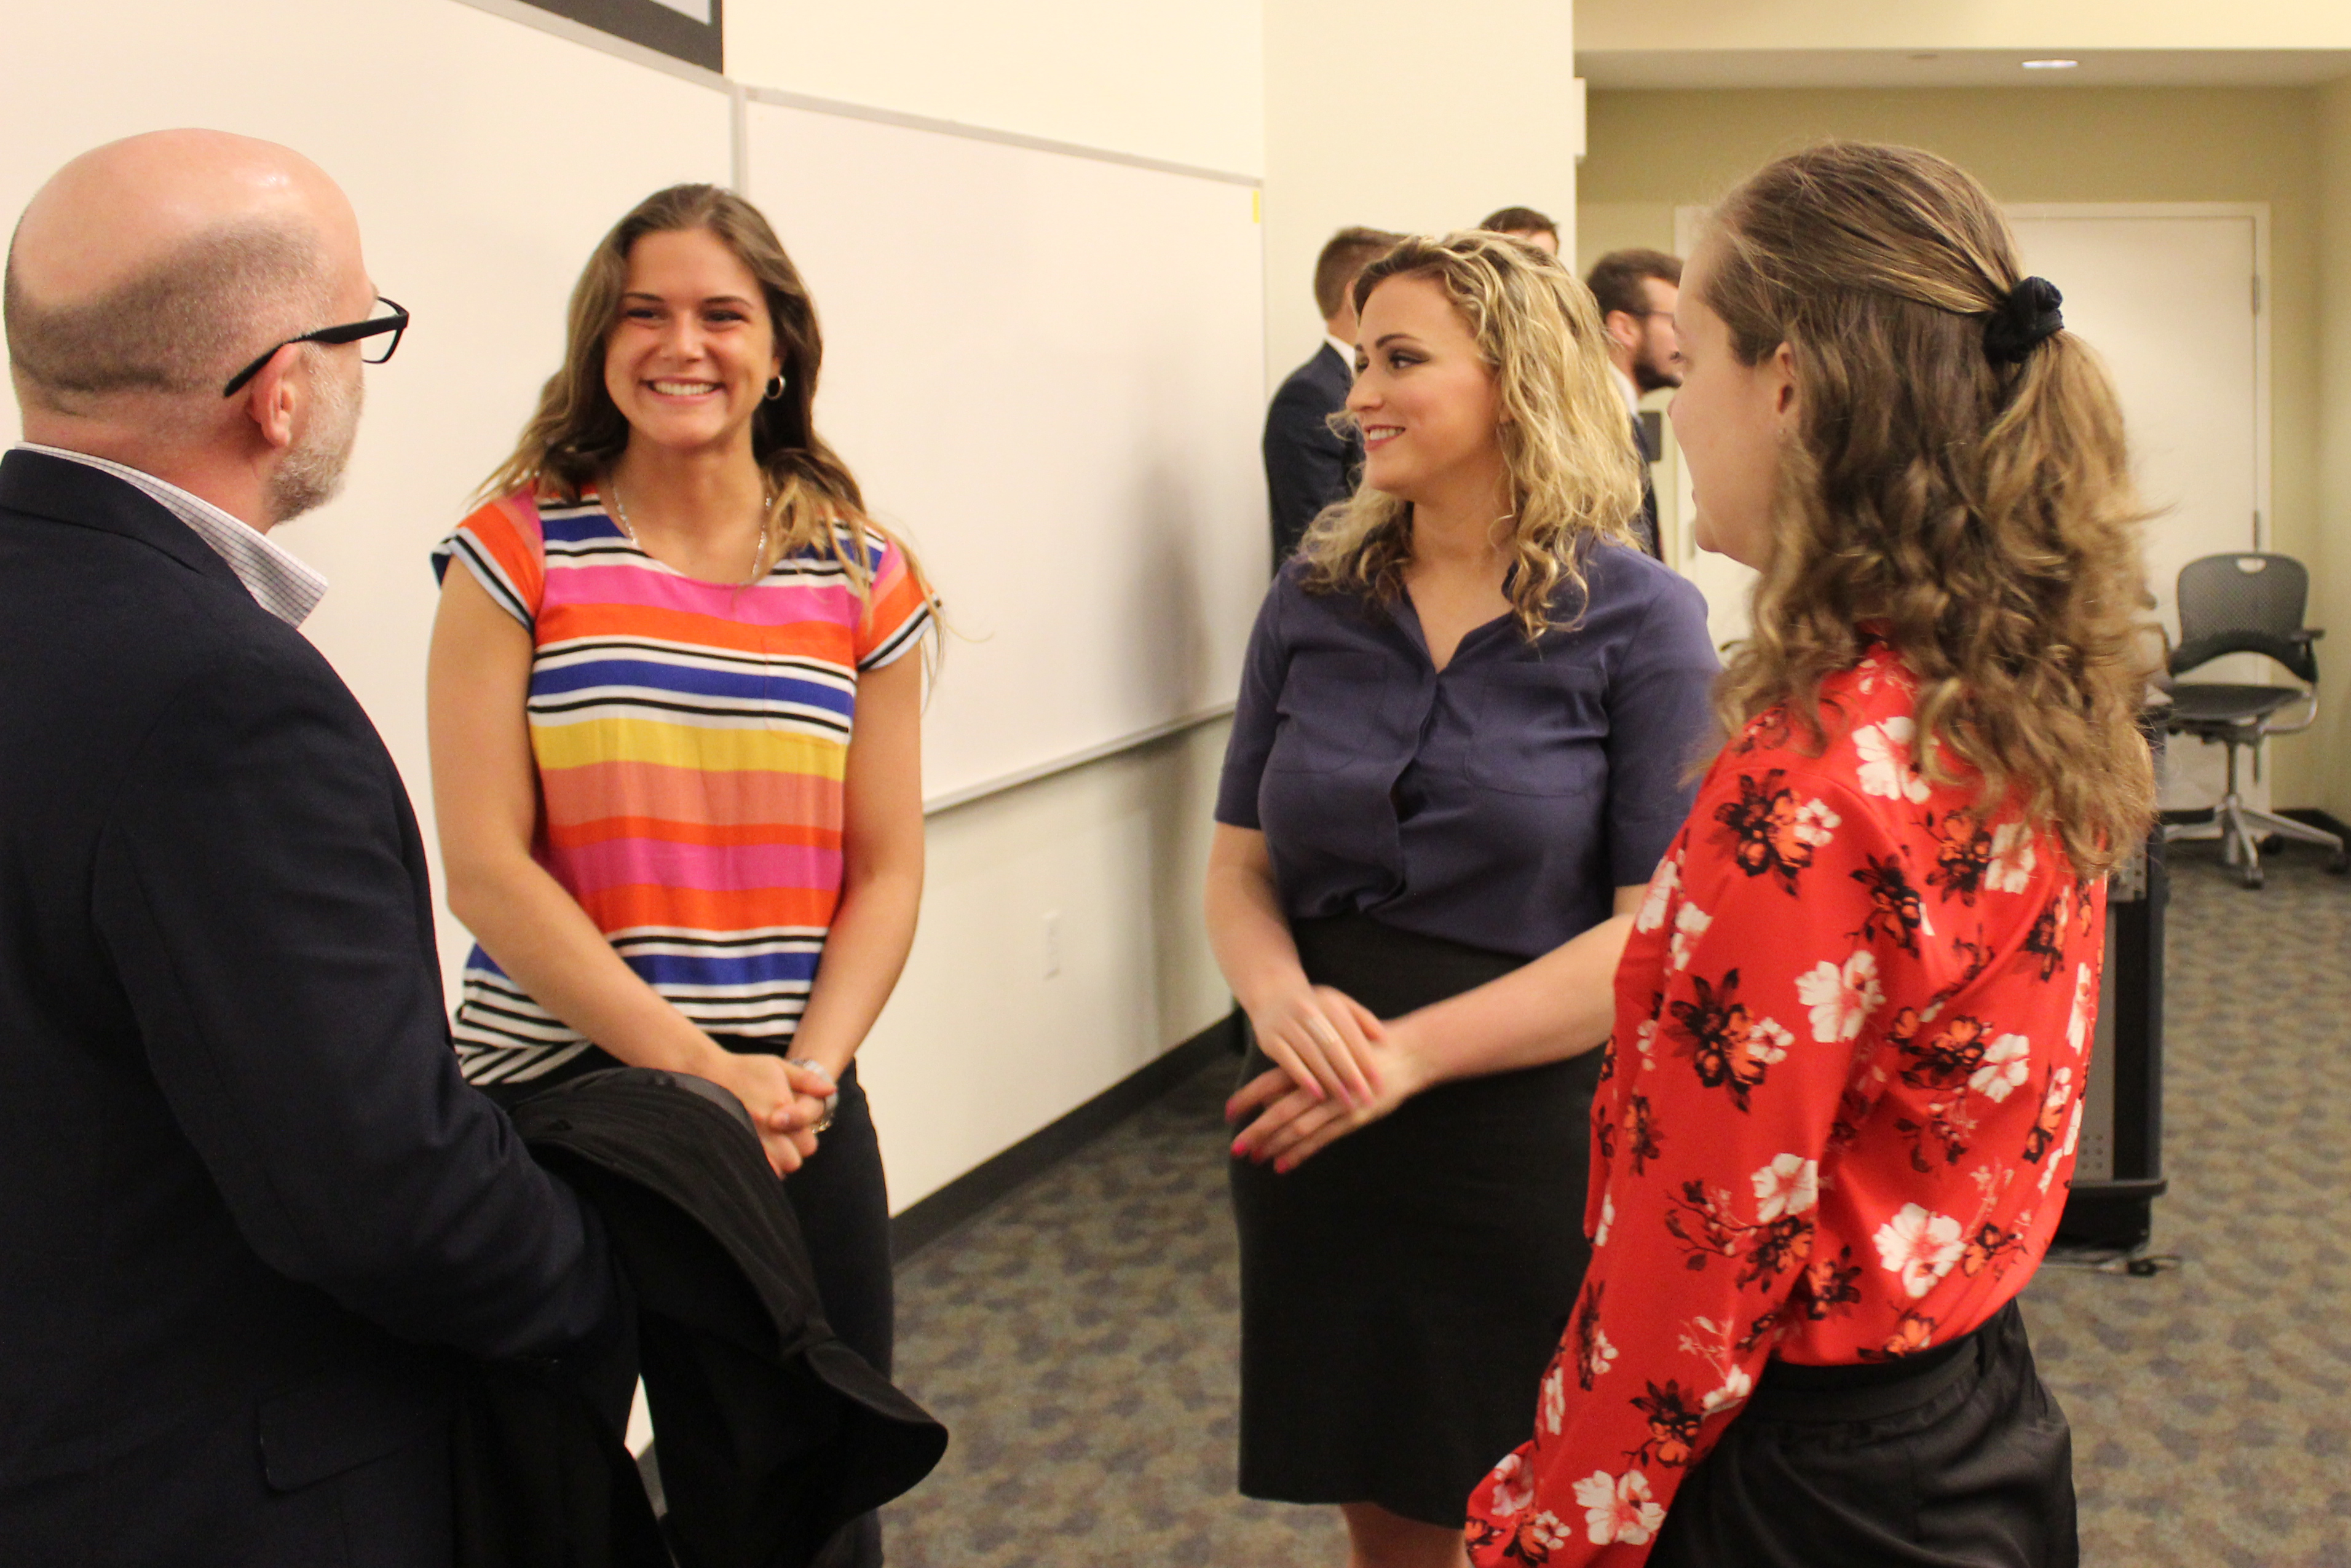 Jessica Lizzio (left), Amanda Lawler, and Brooklyn Jewsberry talk with their client after their ICC presentation. They worked with the environmentally focused nonprofit.